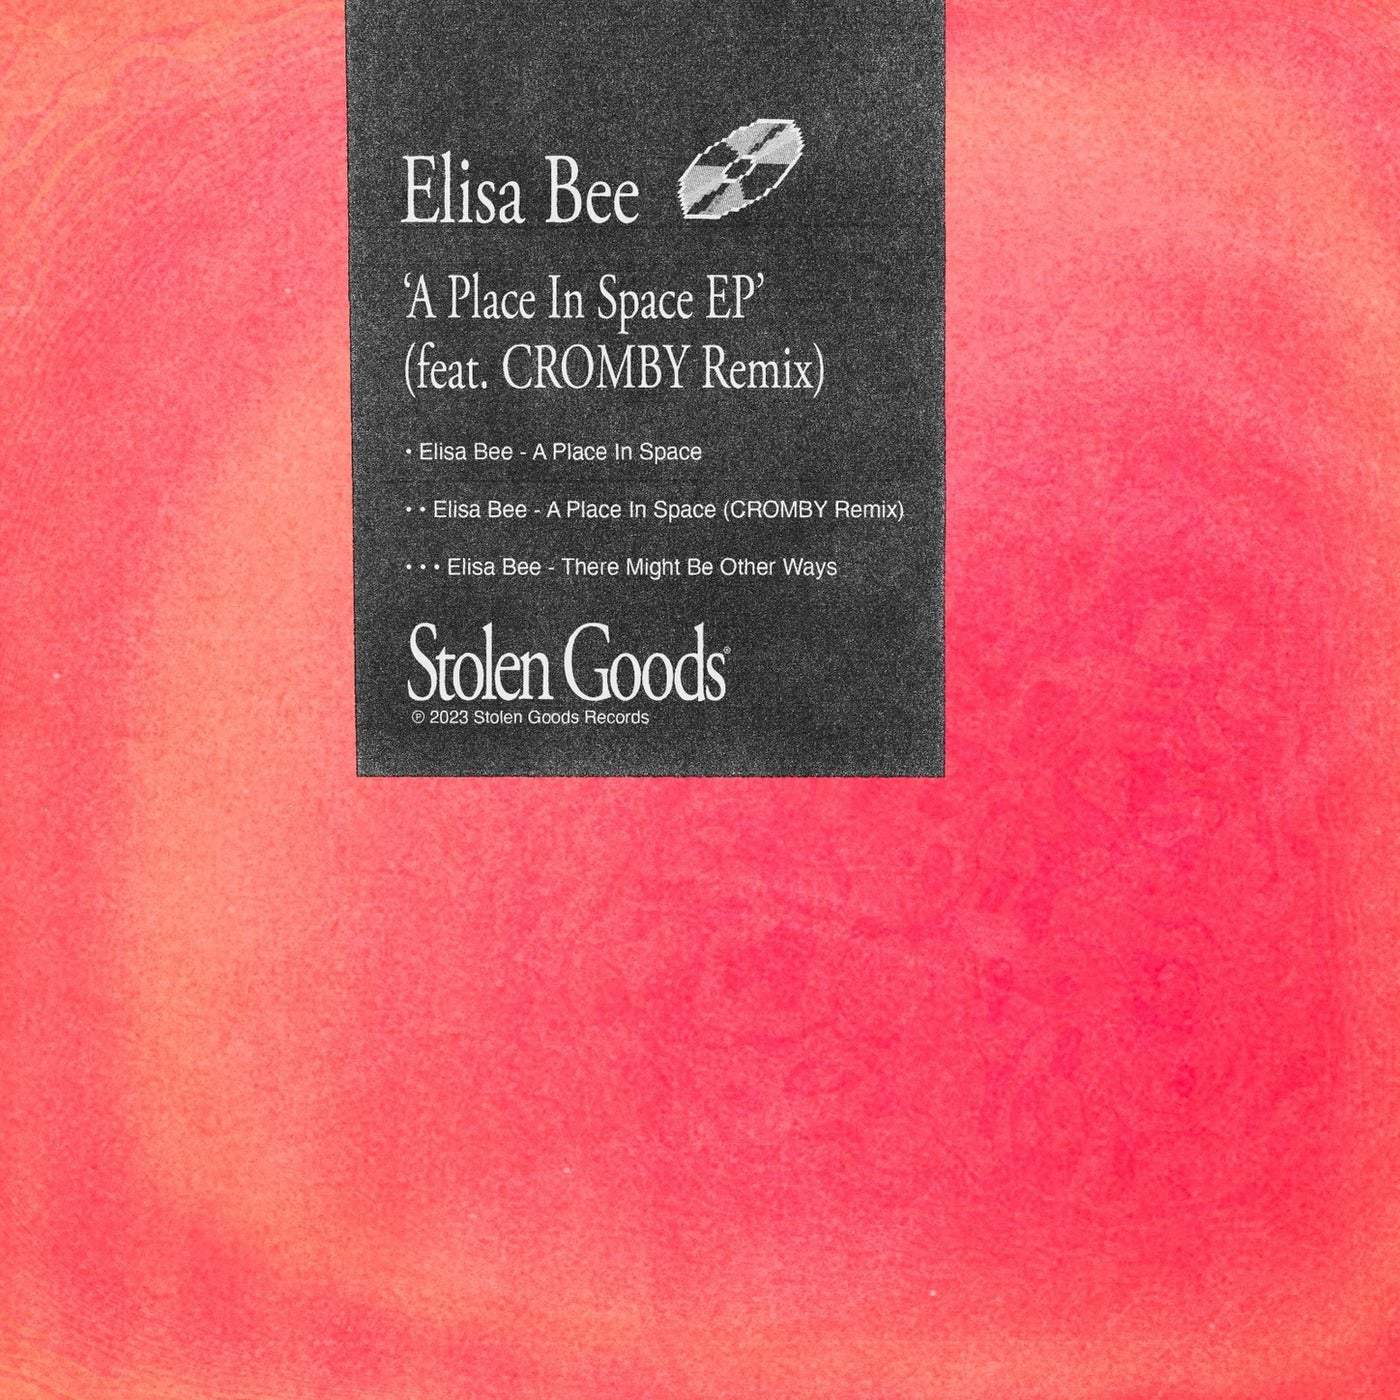 Download Elisa Bee - A Place in Space EP on Electrobuzz